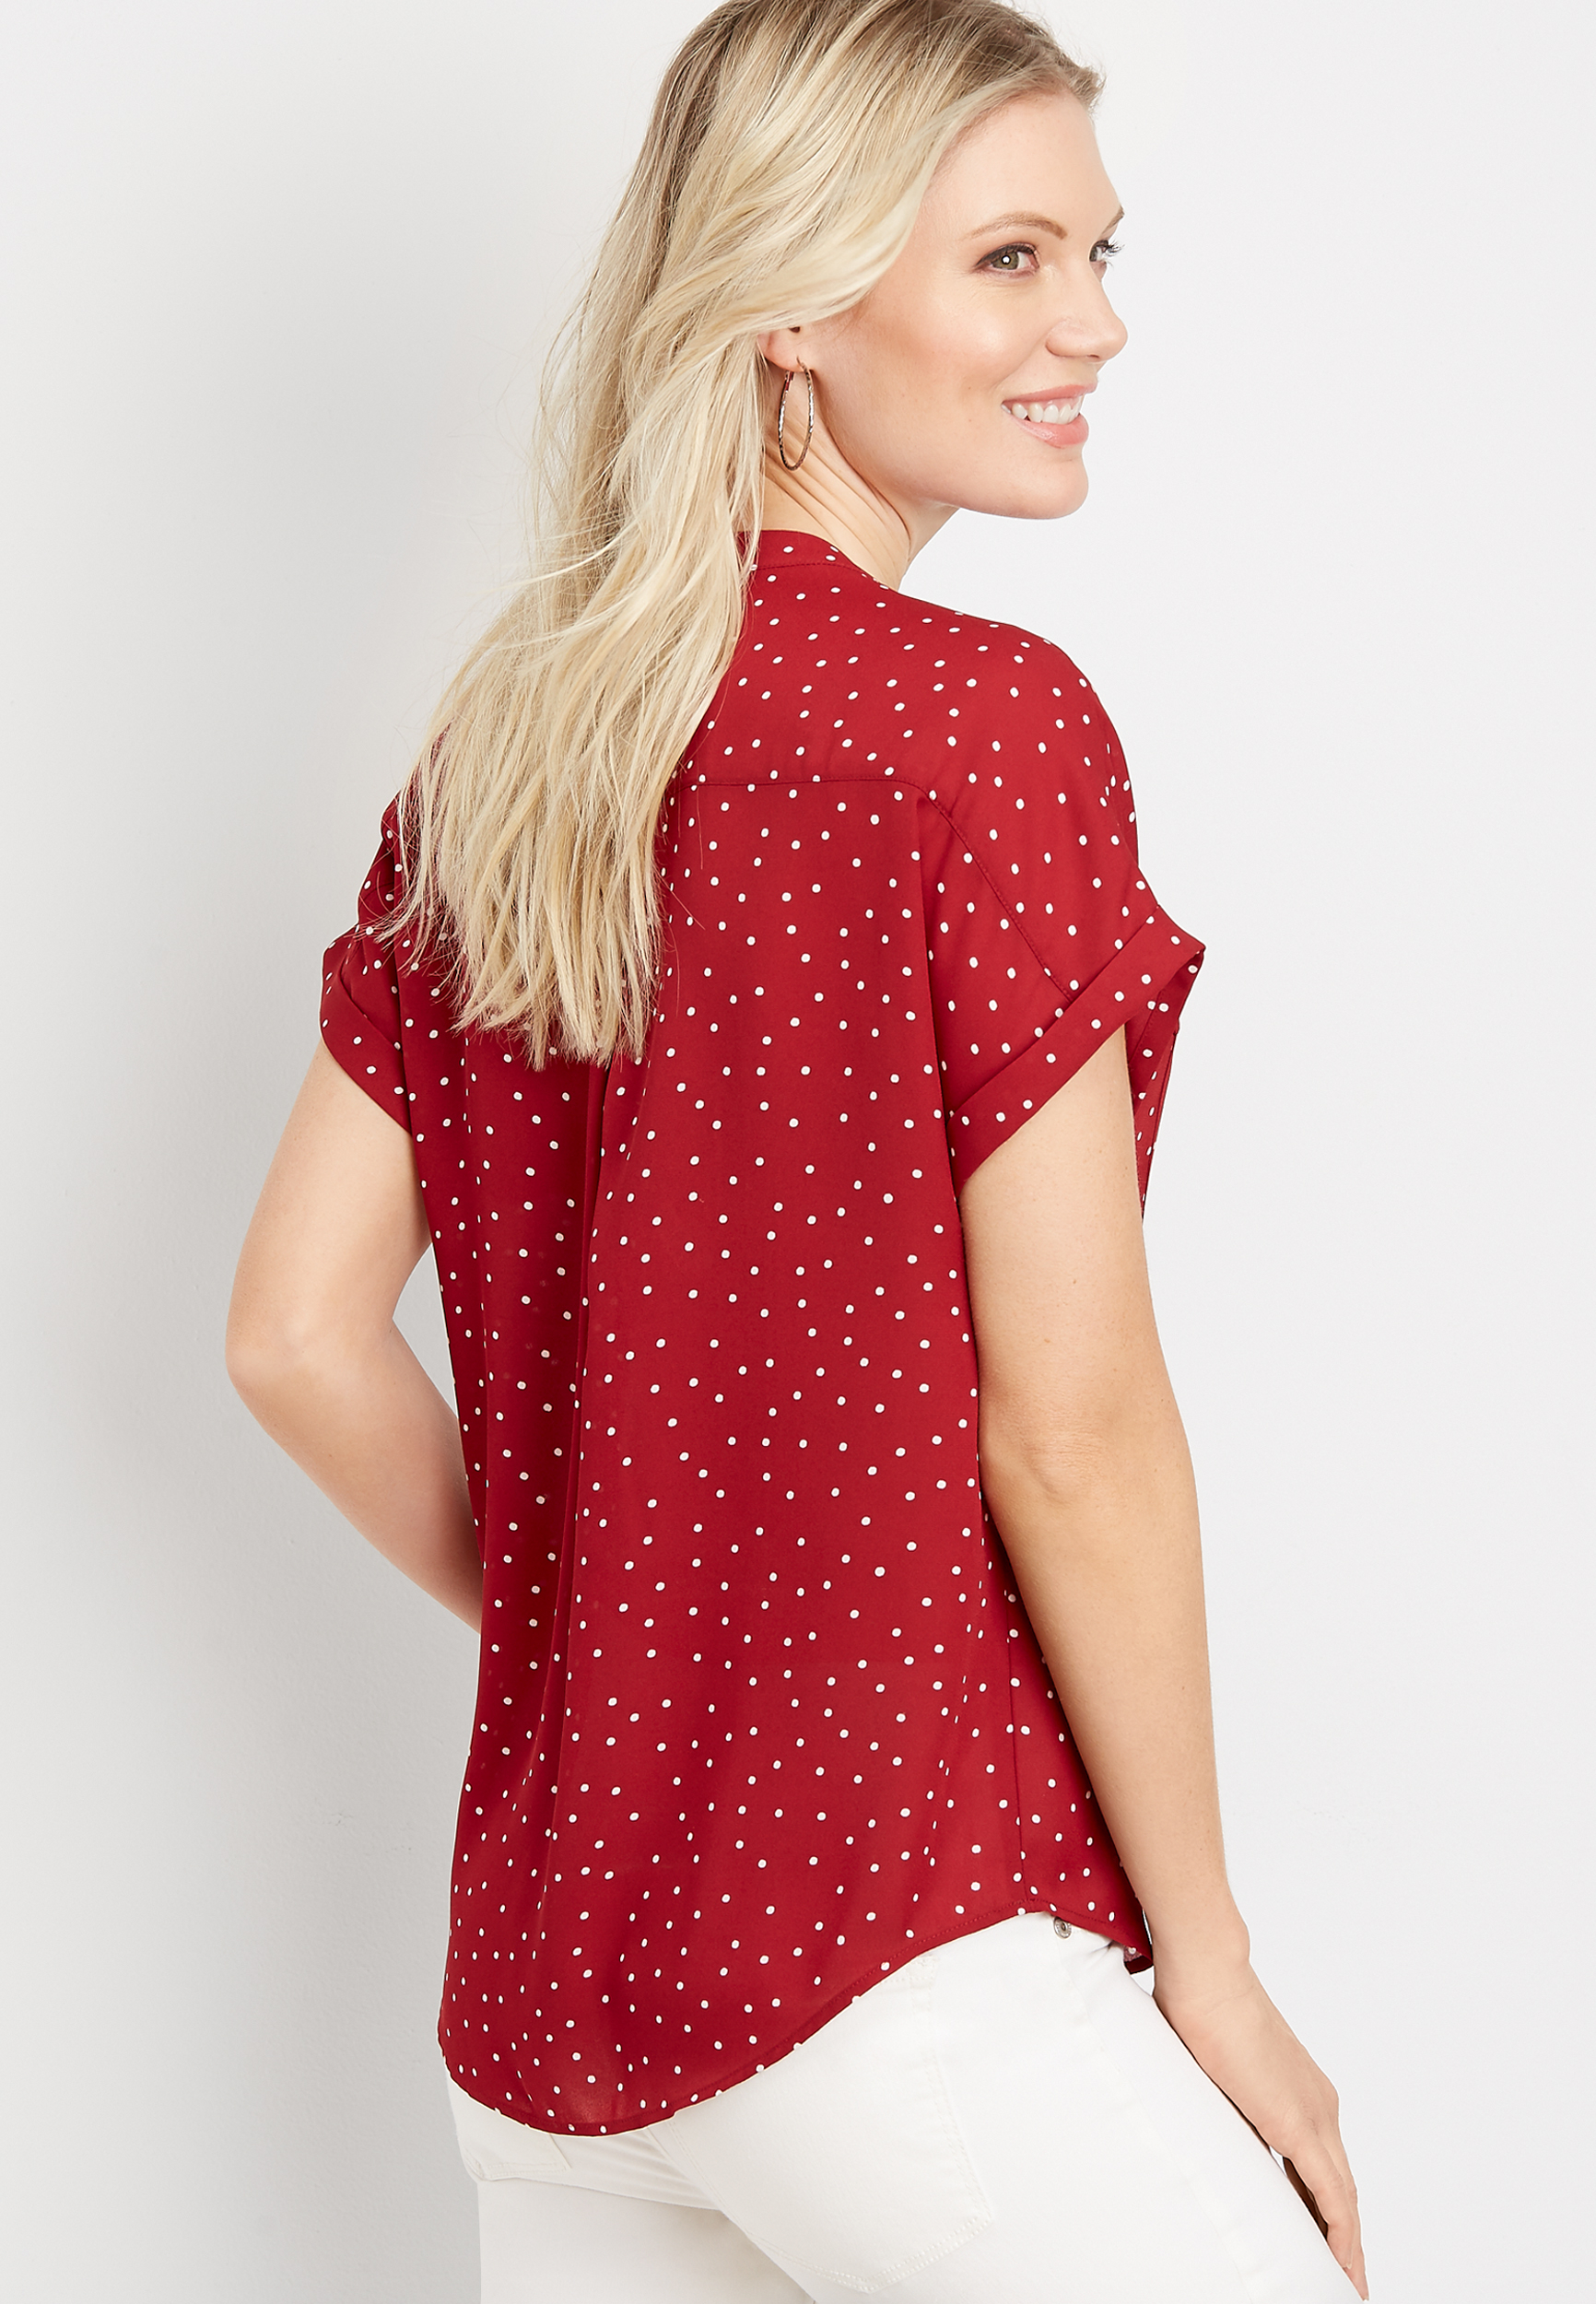 Maurices Women's x Large Size Atwood Pleated Polka Dot Blouse - Shop The Look - Work Wear Essentials - Shirts & Blouses